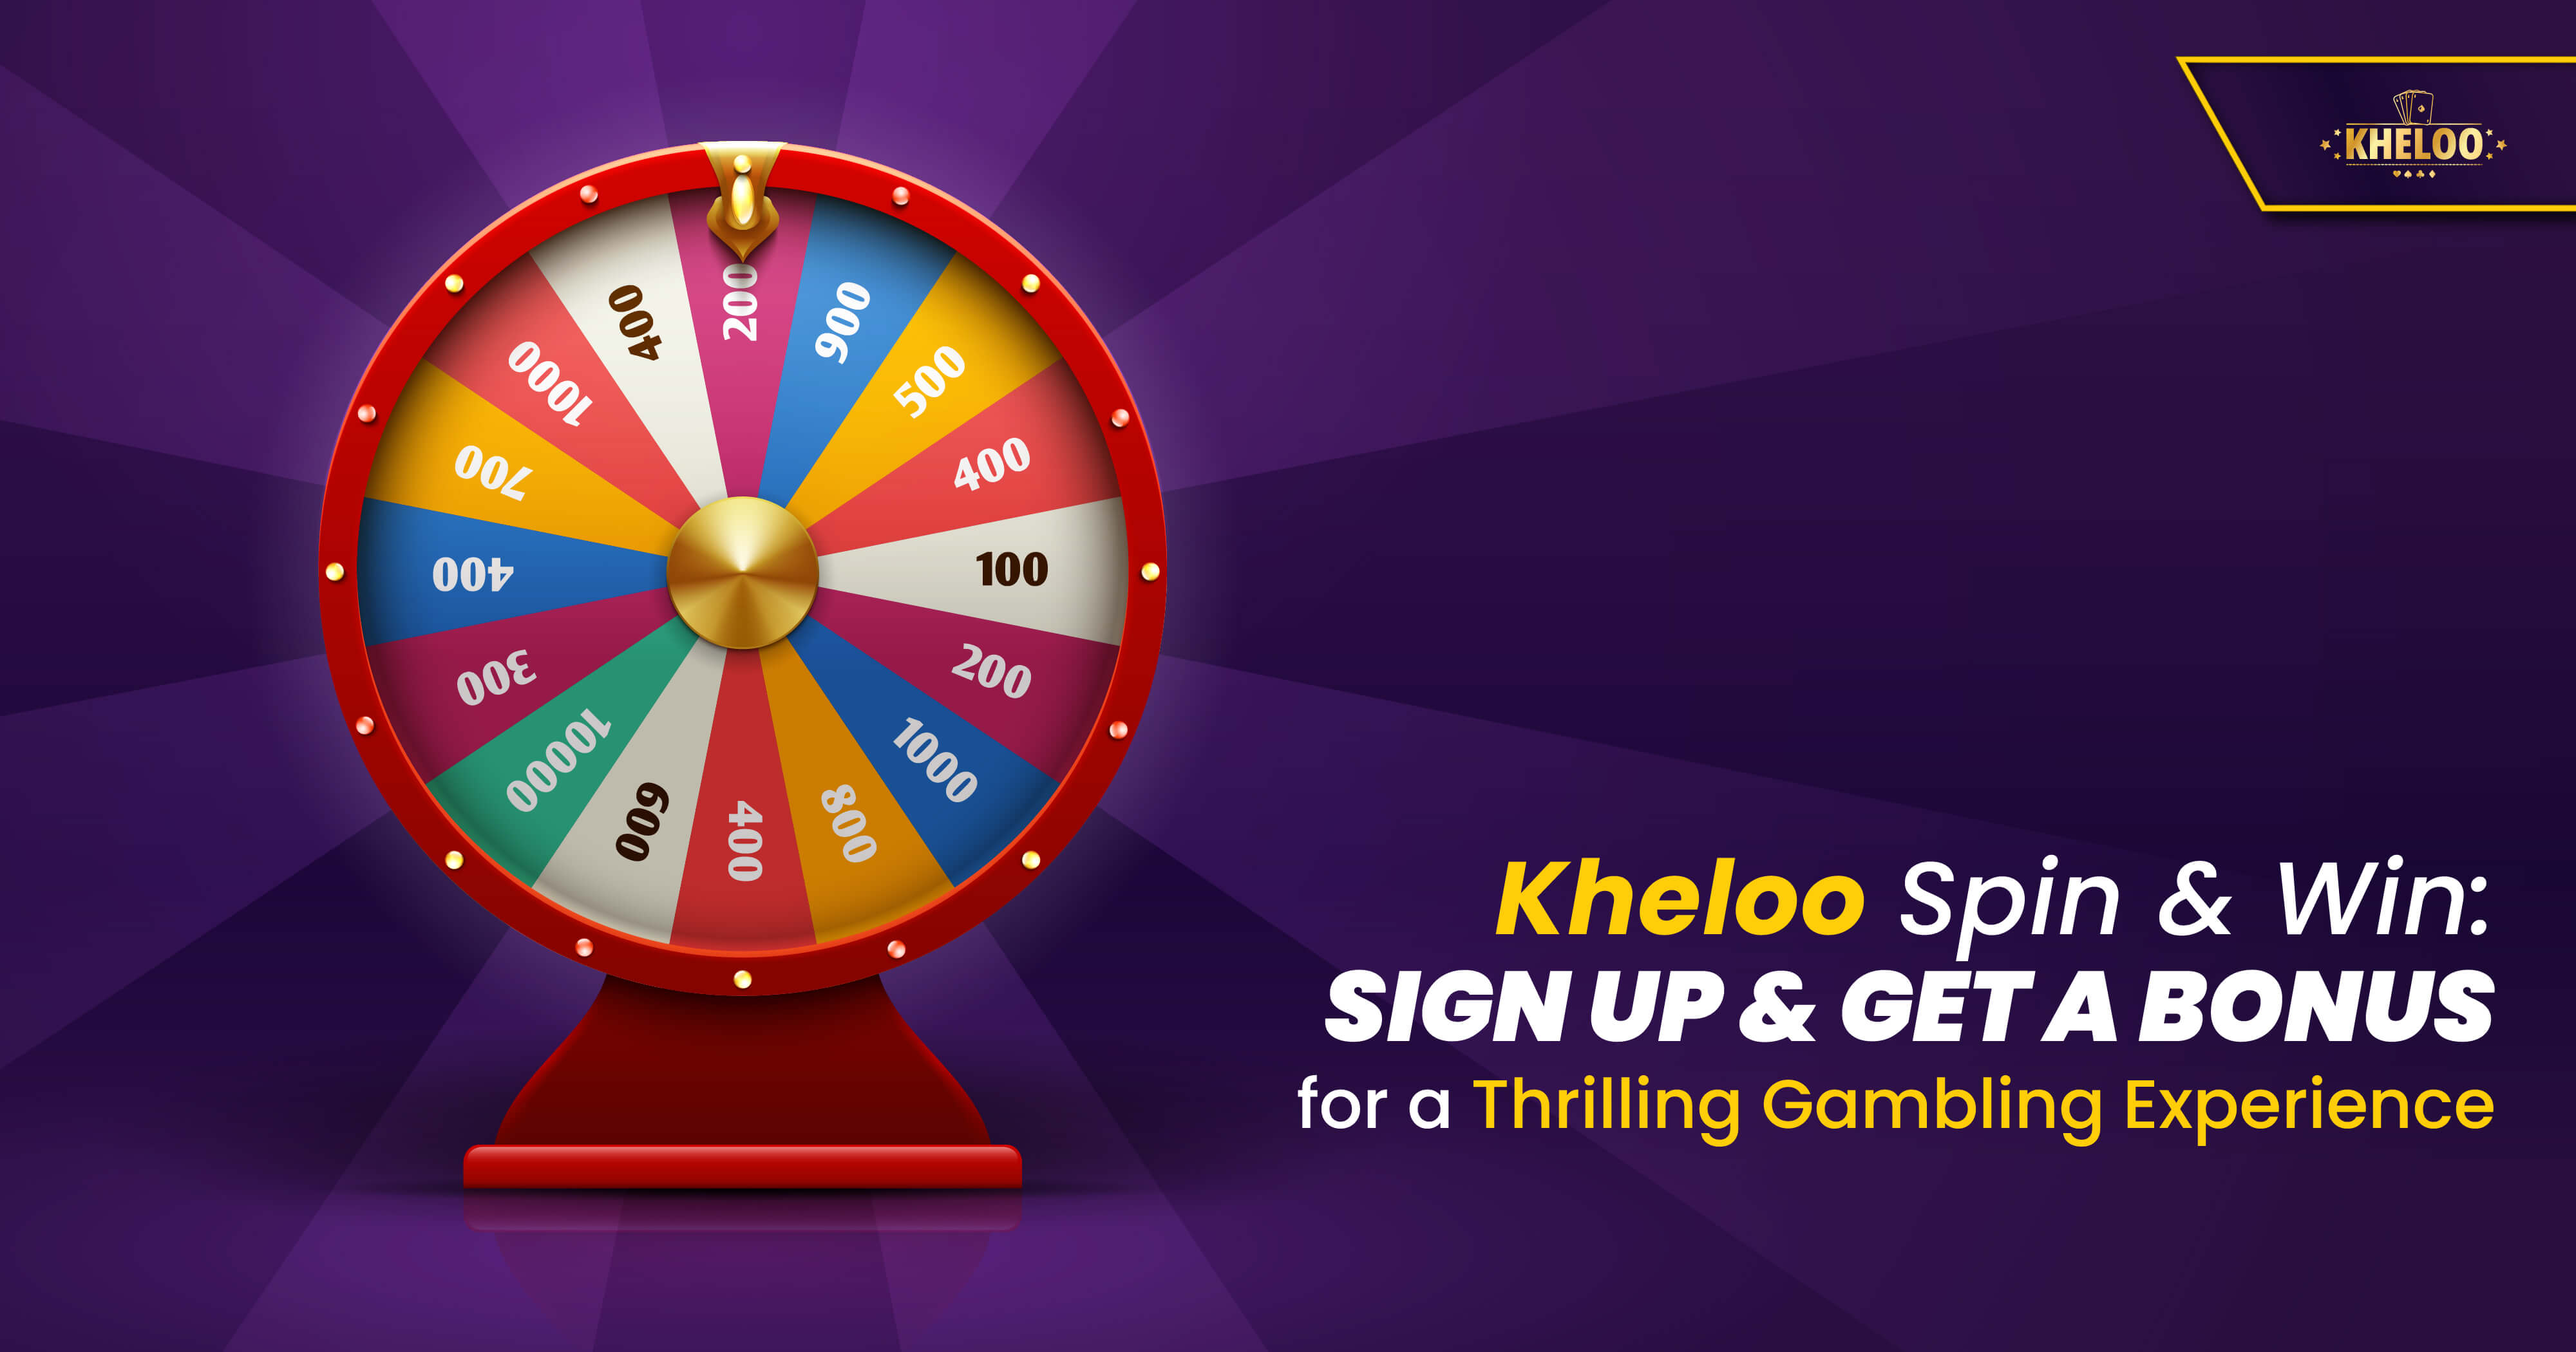 Kheloo Spin And Win: Sign Up And Get A Bonus For a Thrilling Gambling Experience